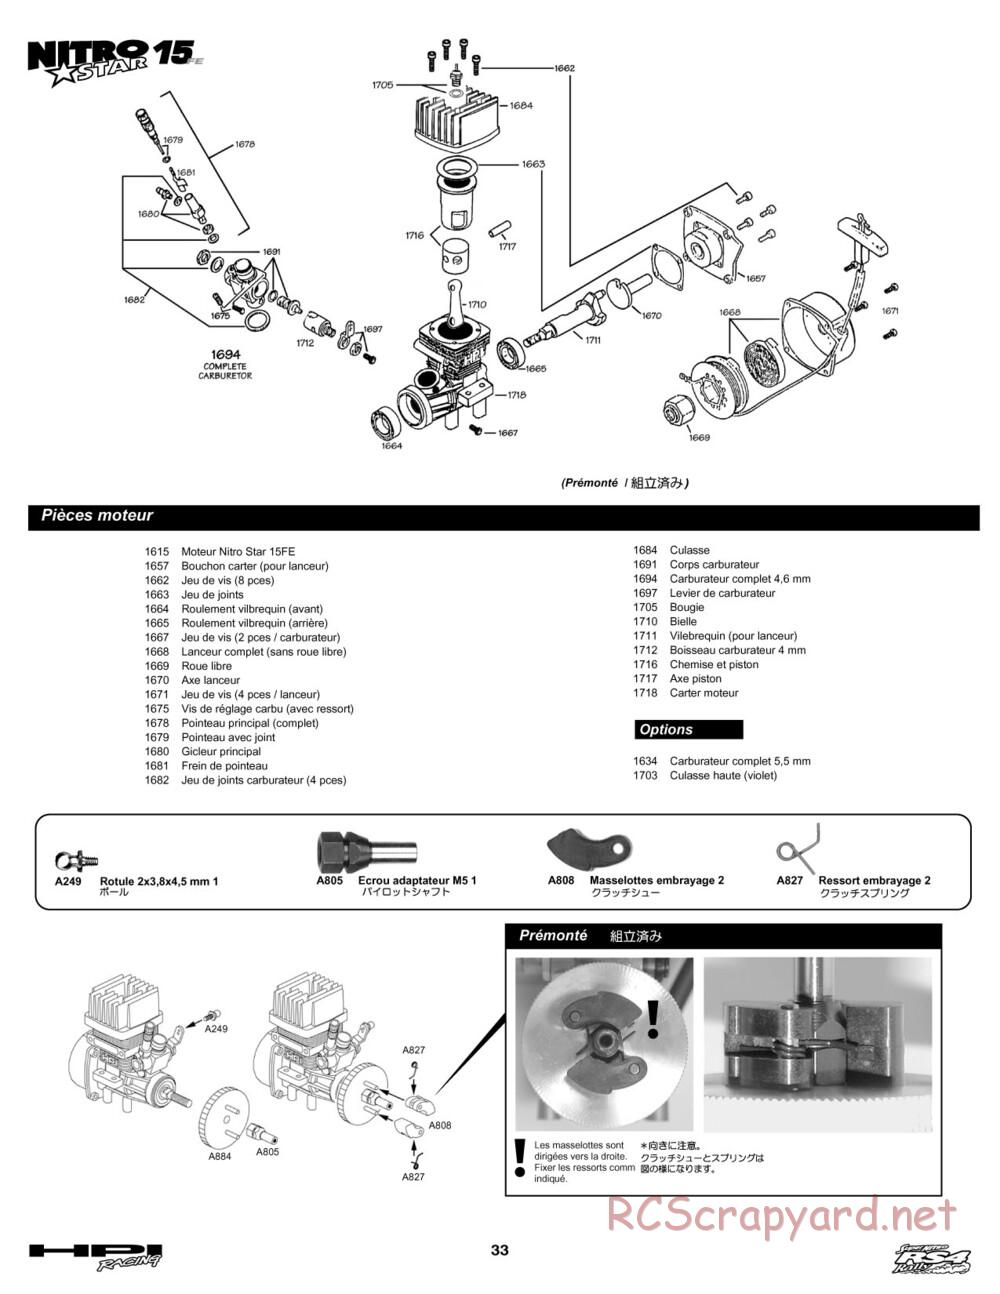 HPI - Super Nitro RS4 Rally - Manual - Page 33